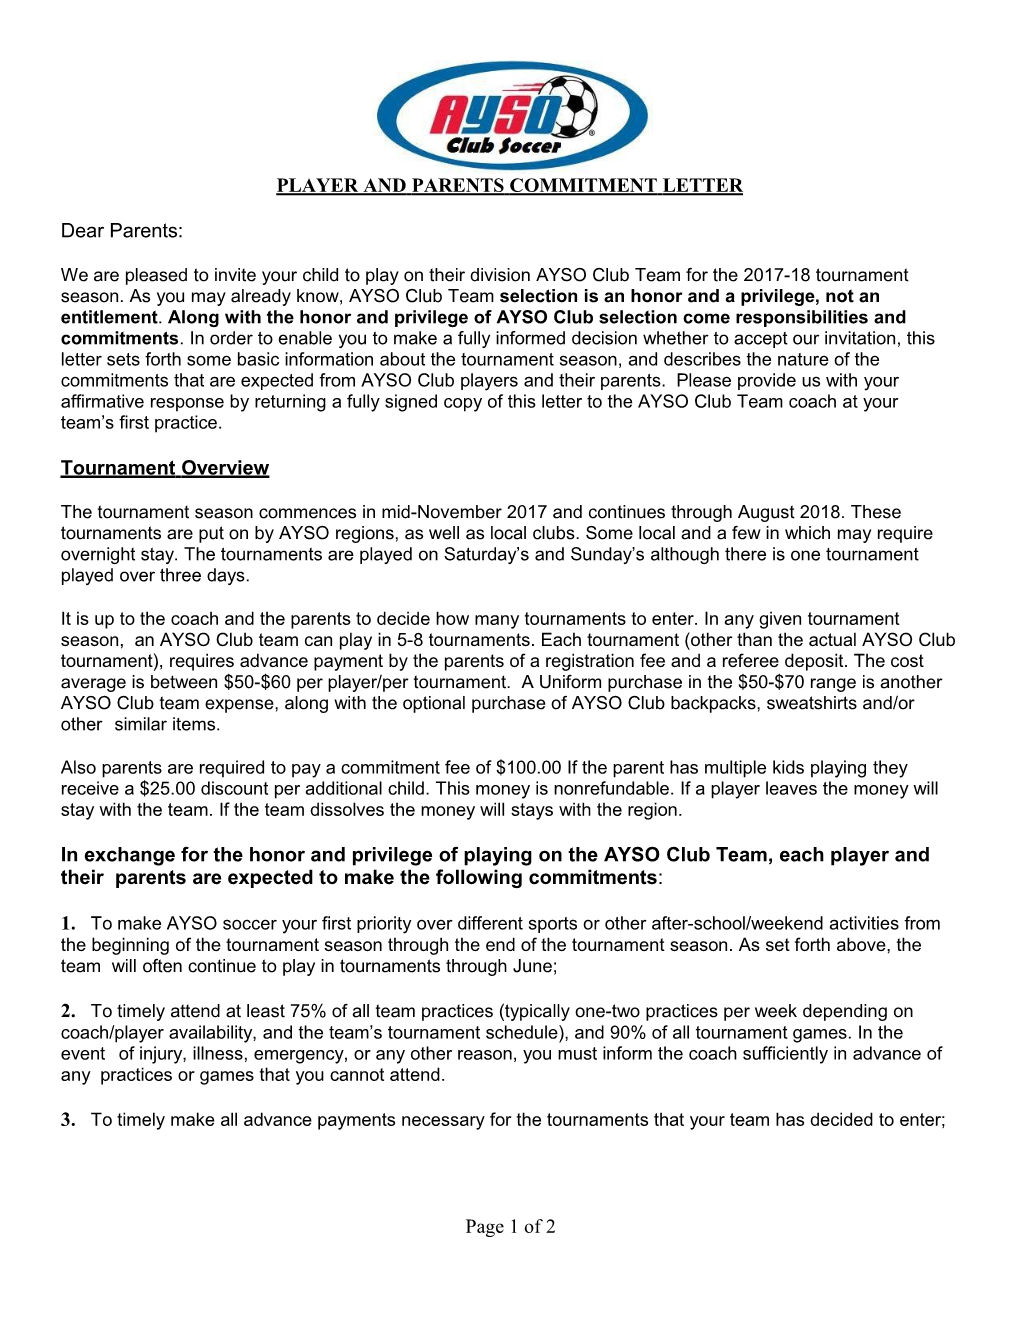 Player and Parent Commitment Letter